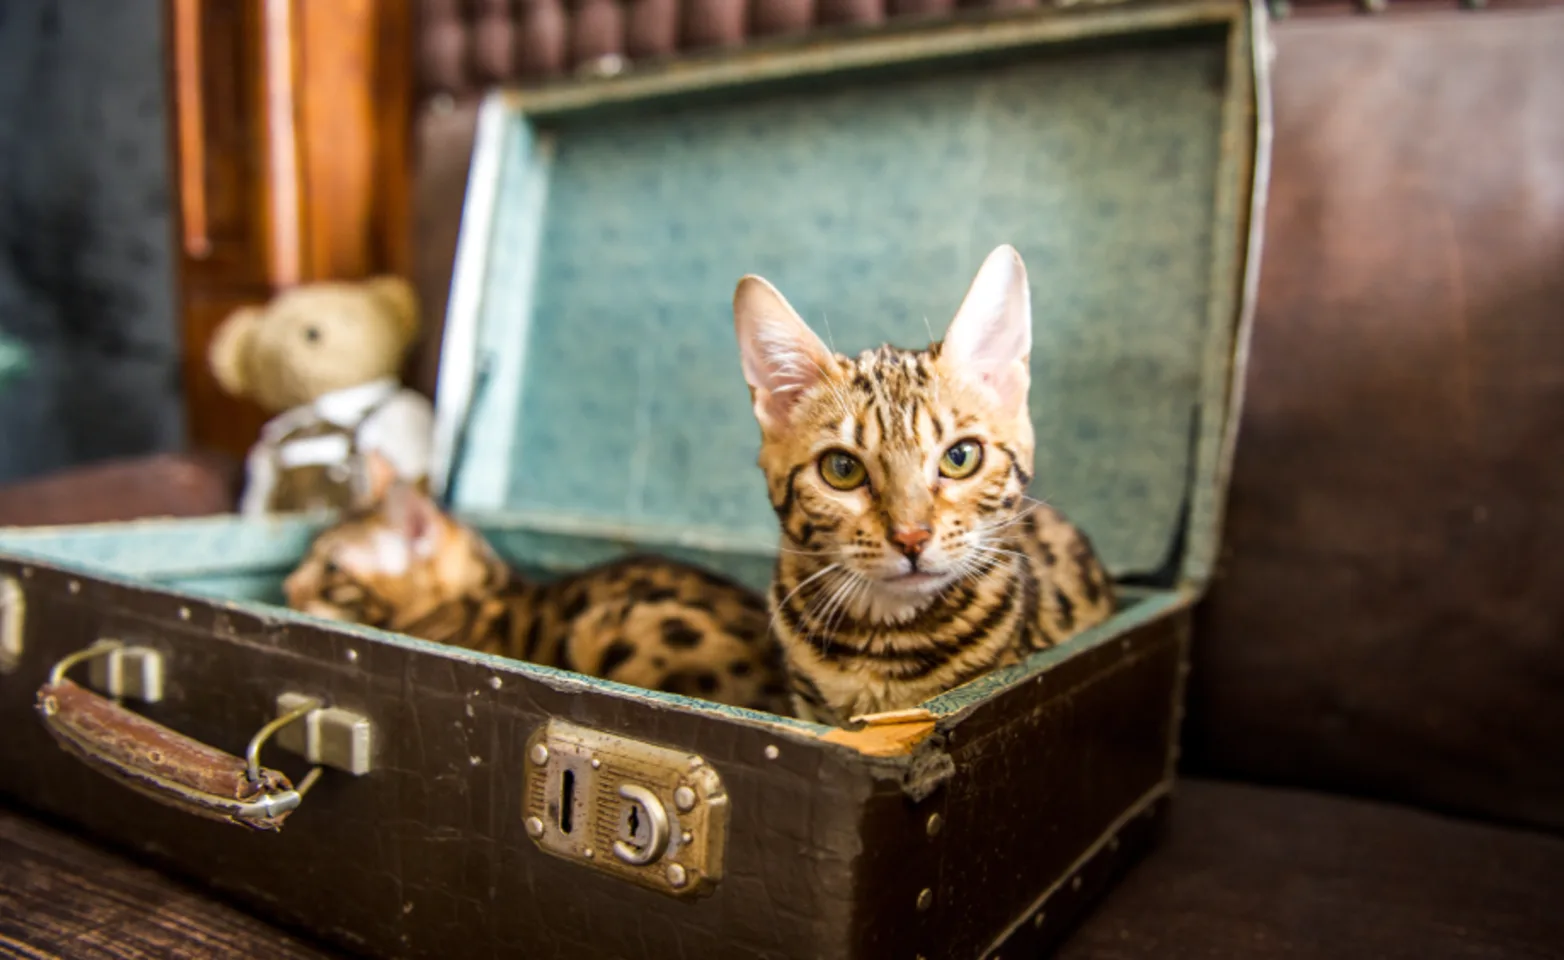 Two calico cats are sitting inside an old brown luggage. 